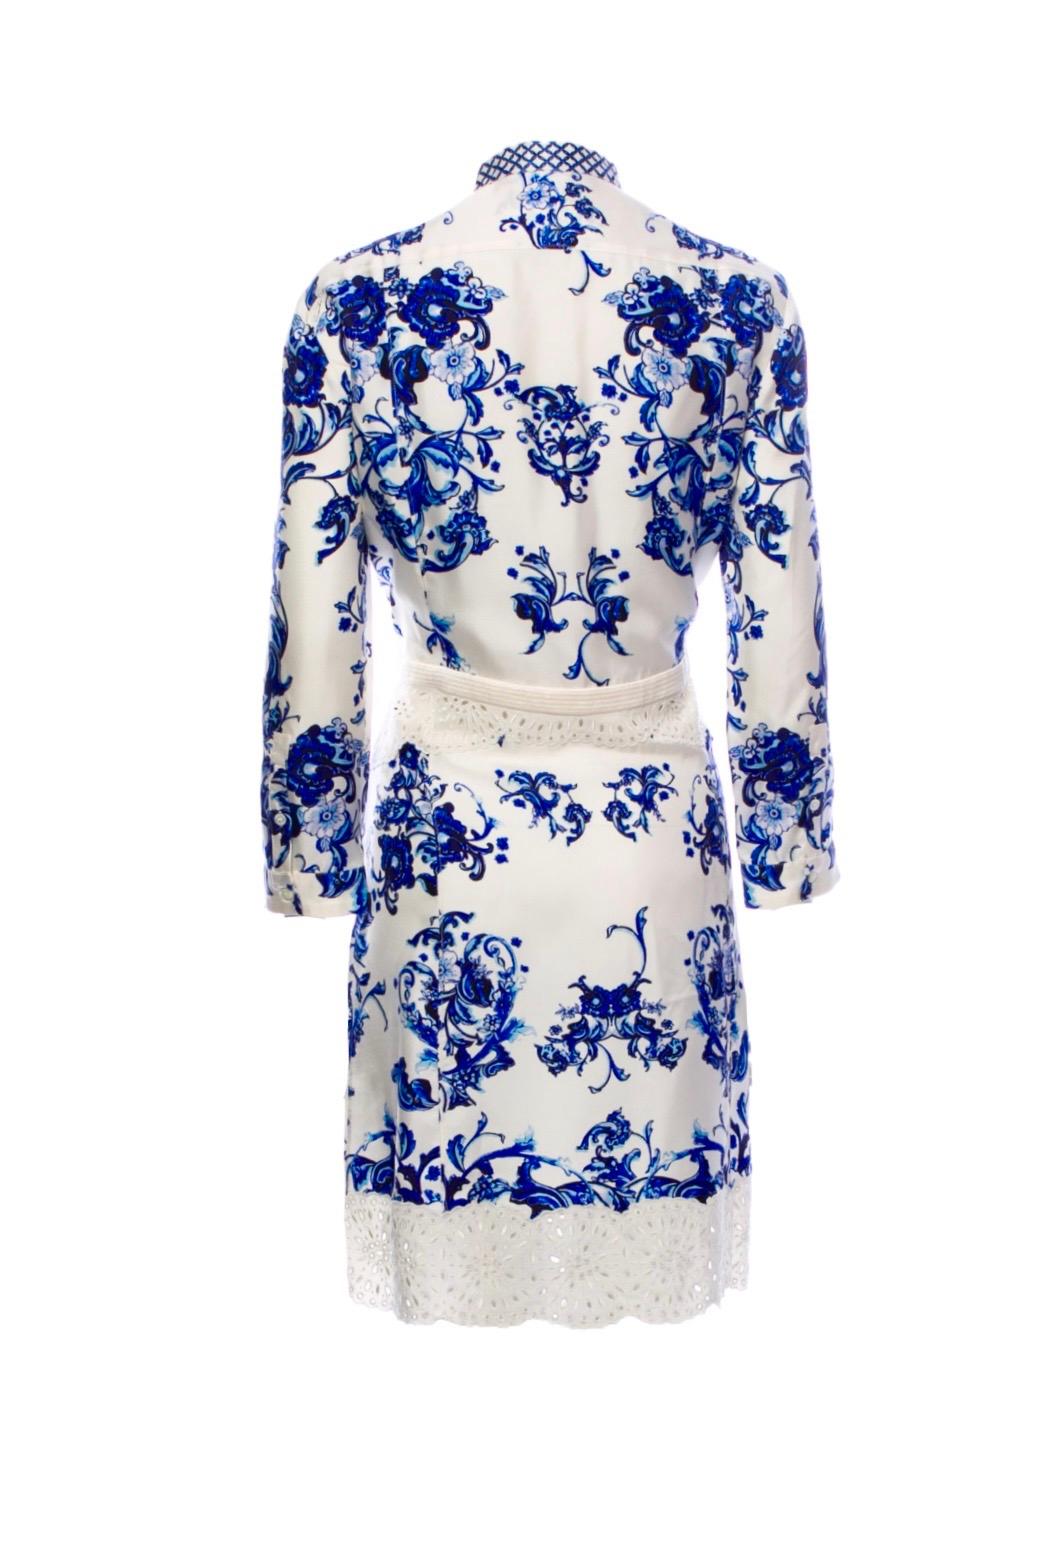 
A beautiful ROBERTO CAVALLI dress that will last you for years
From the most prestigious ROBERTO CAVALLI main line
Made out of most beautiful printed silk with delicate floral „porcelain“ print
Eyelet details
„Roberto Cavalli“ signature discreetly